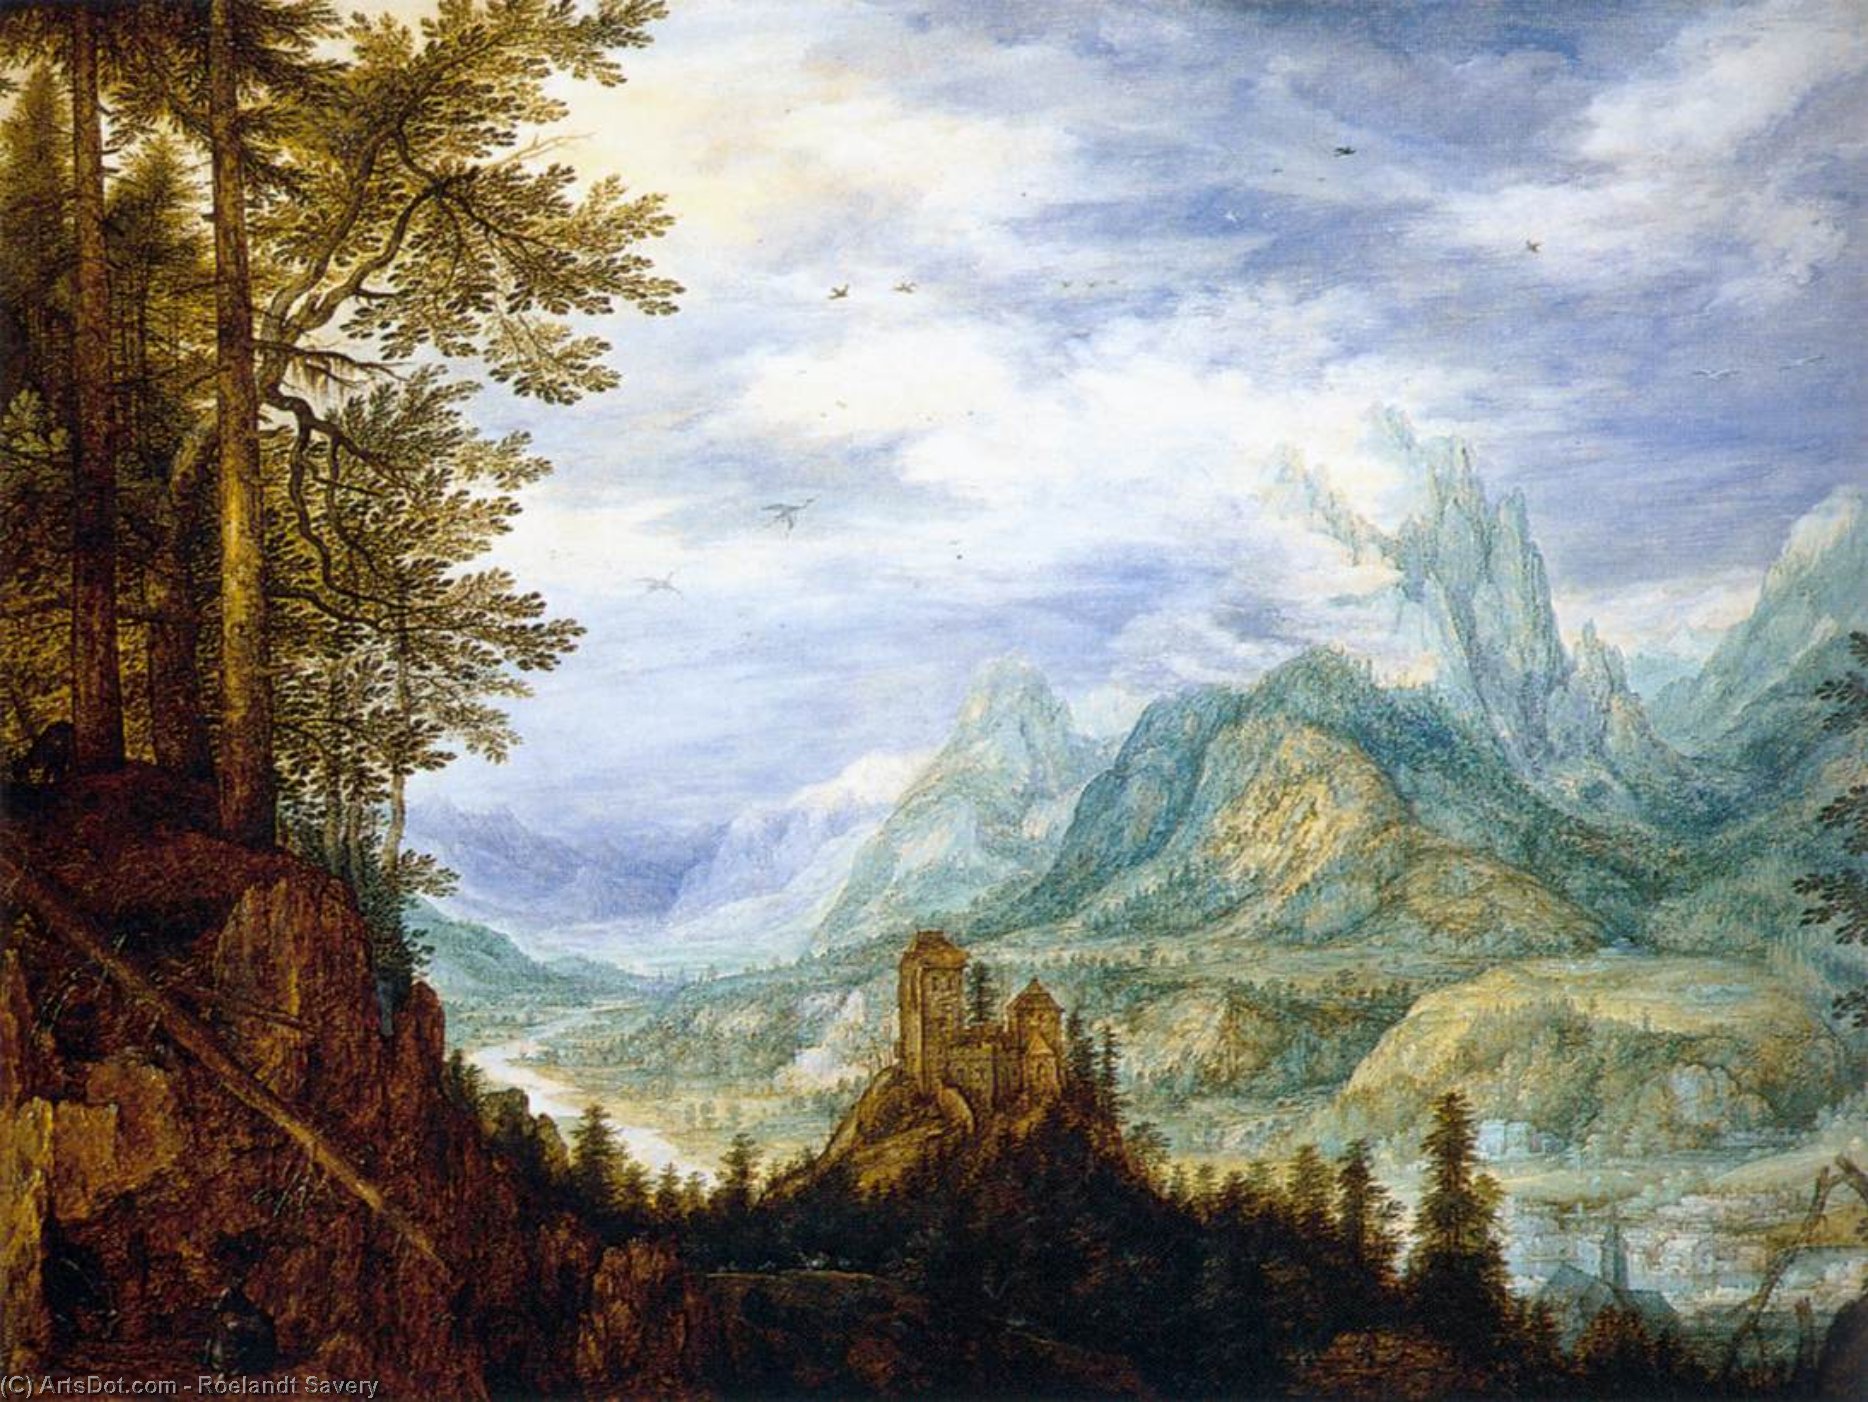 WikiOO.org - 백과 사전 - 회화, 삽화 Roelandt Savery - Mountainous Landscape with a Castle